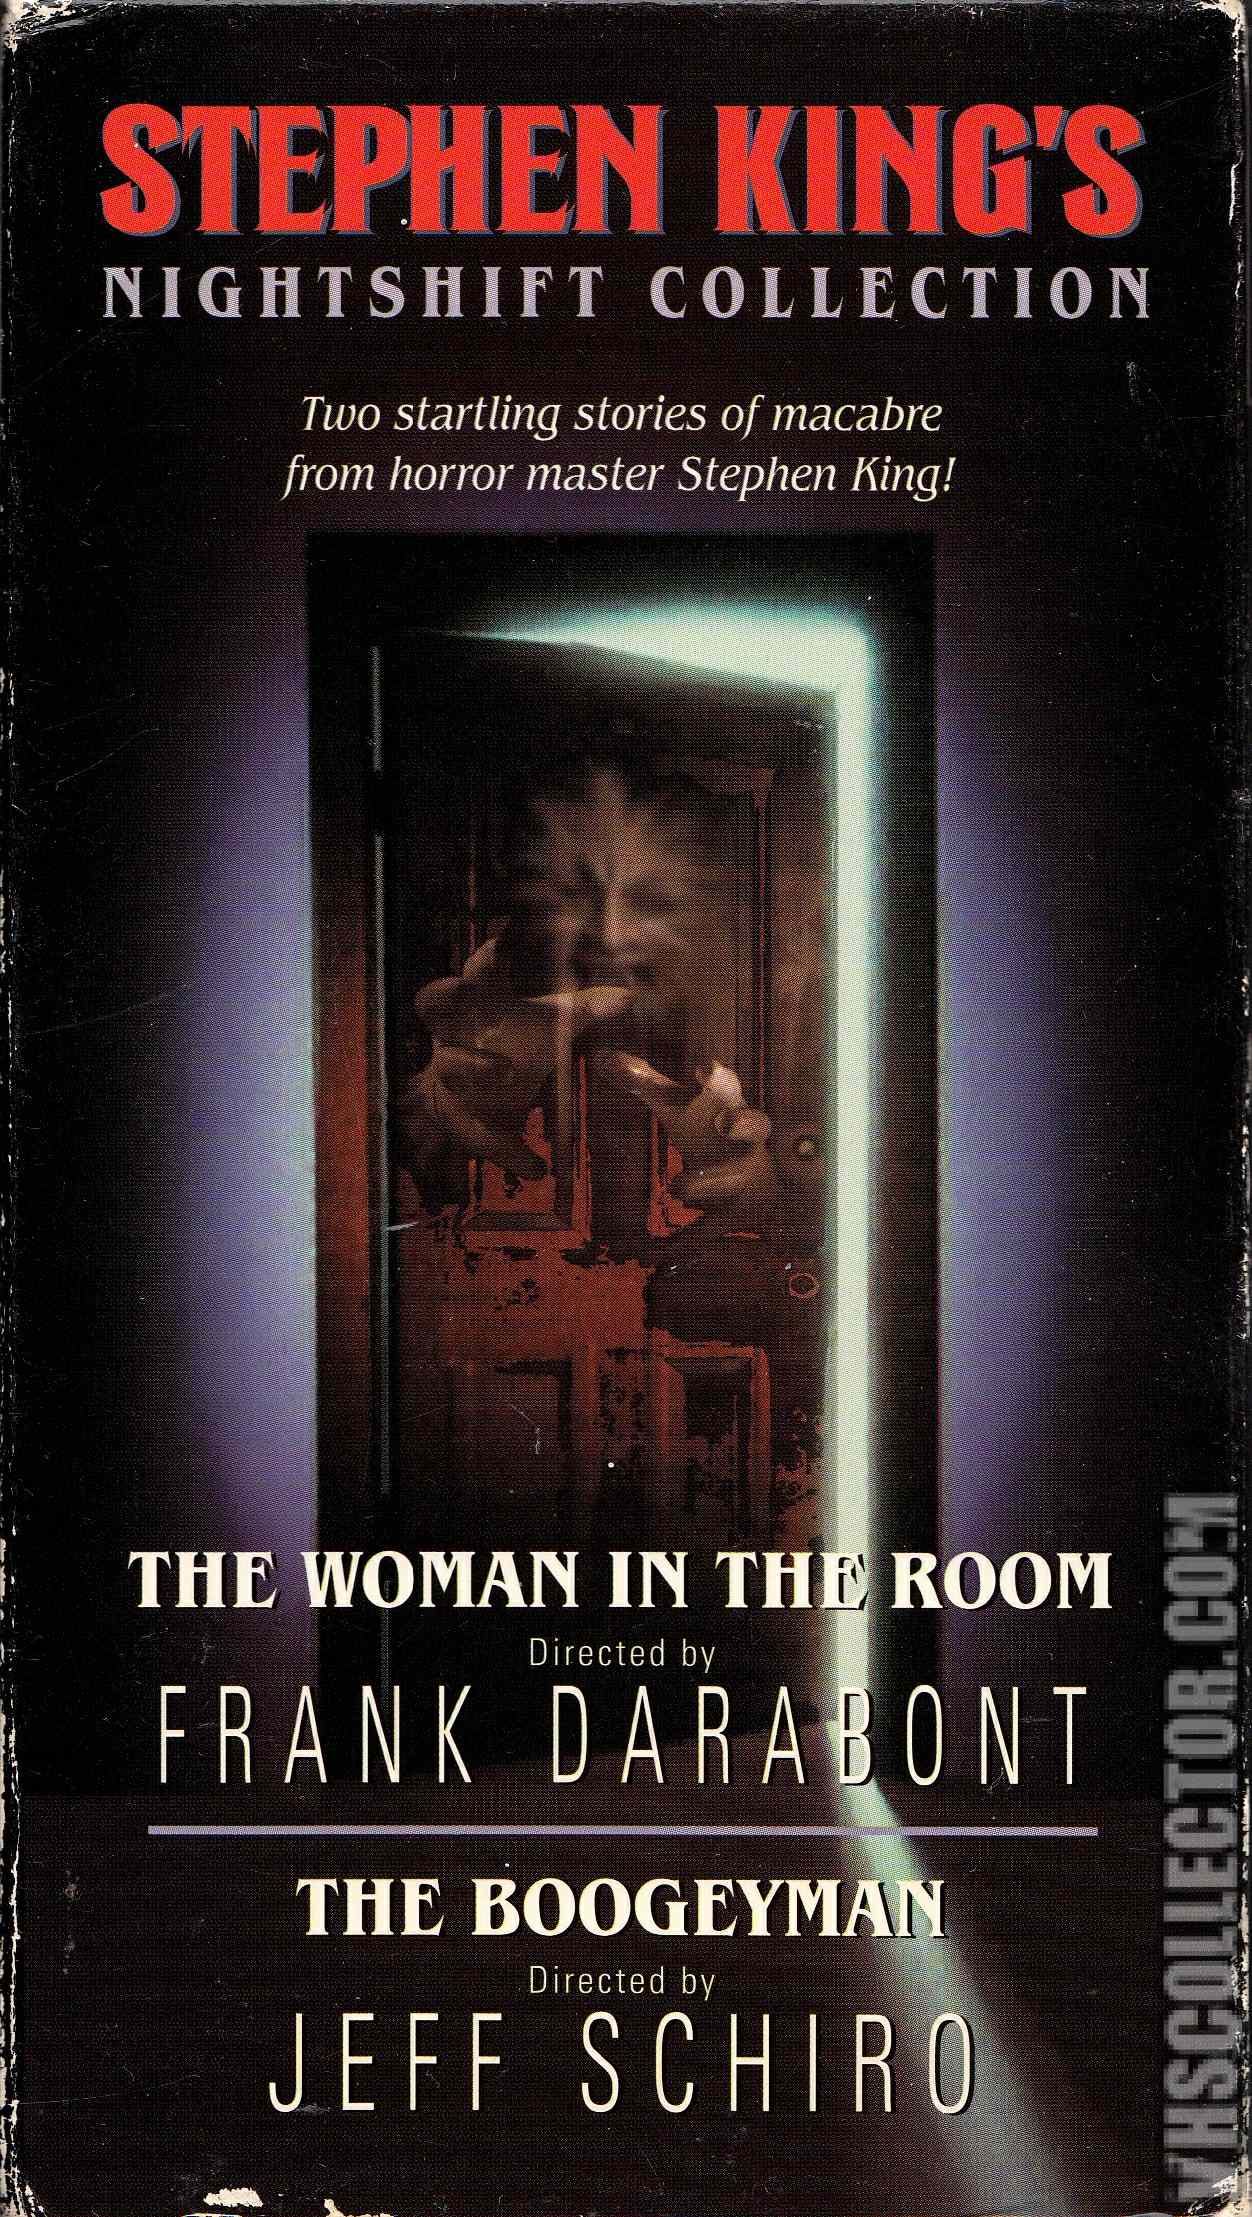 The Woman in the Room (1984) Screenshot 3 